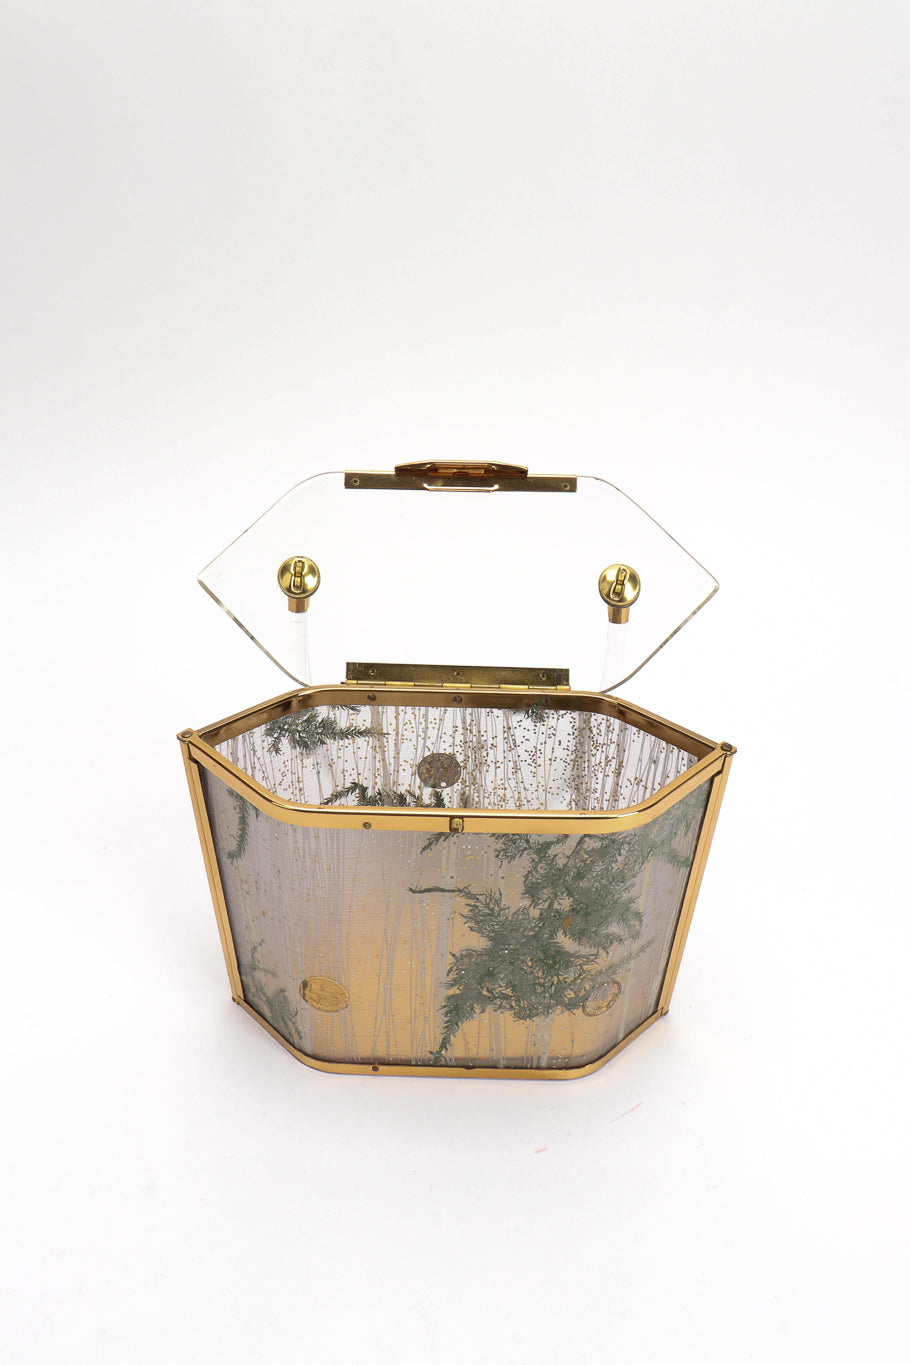 Vintage Majestic Pressed Foliage Lucite Box Bag front view open top on white backdrop @Recessla